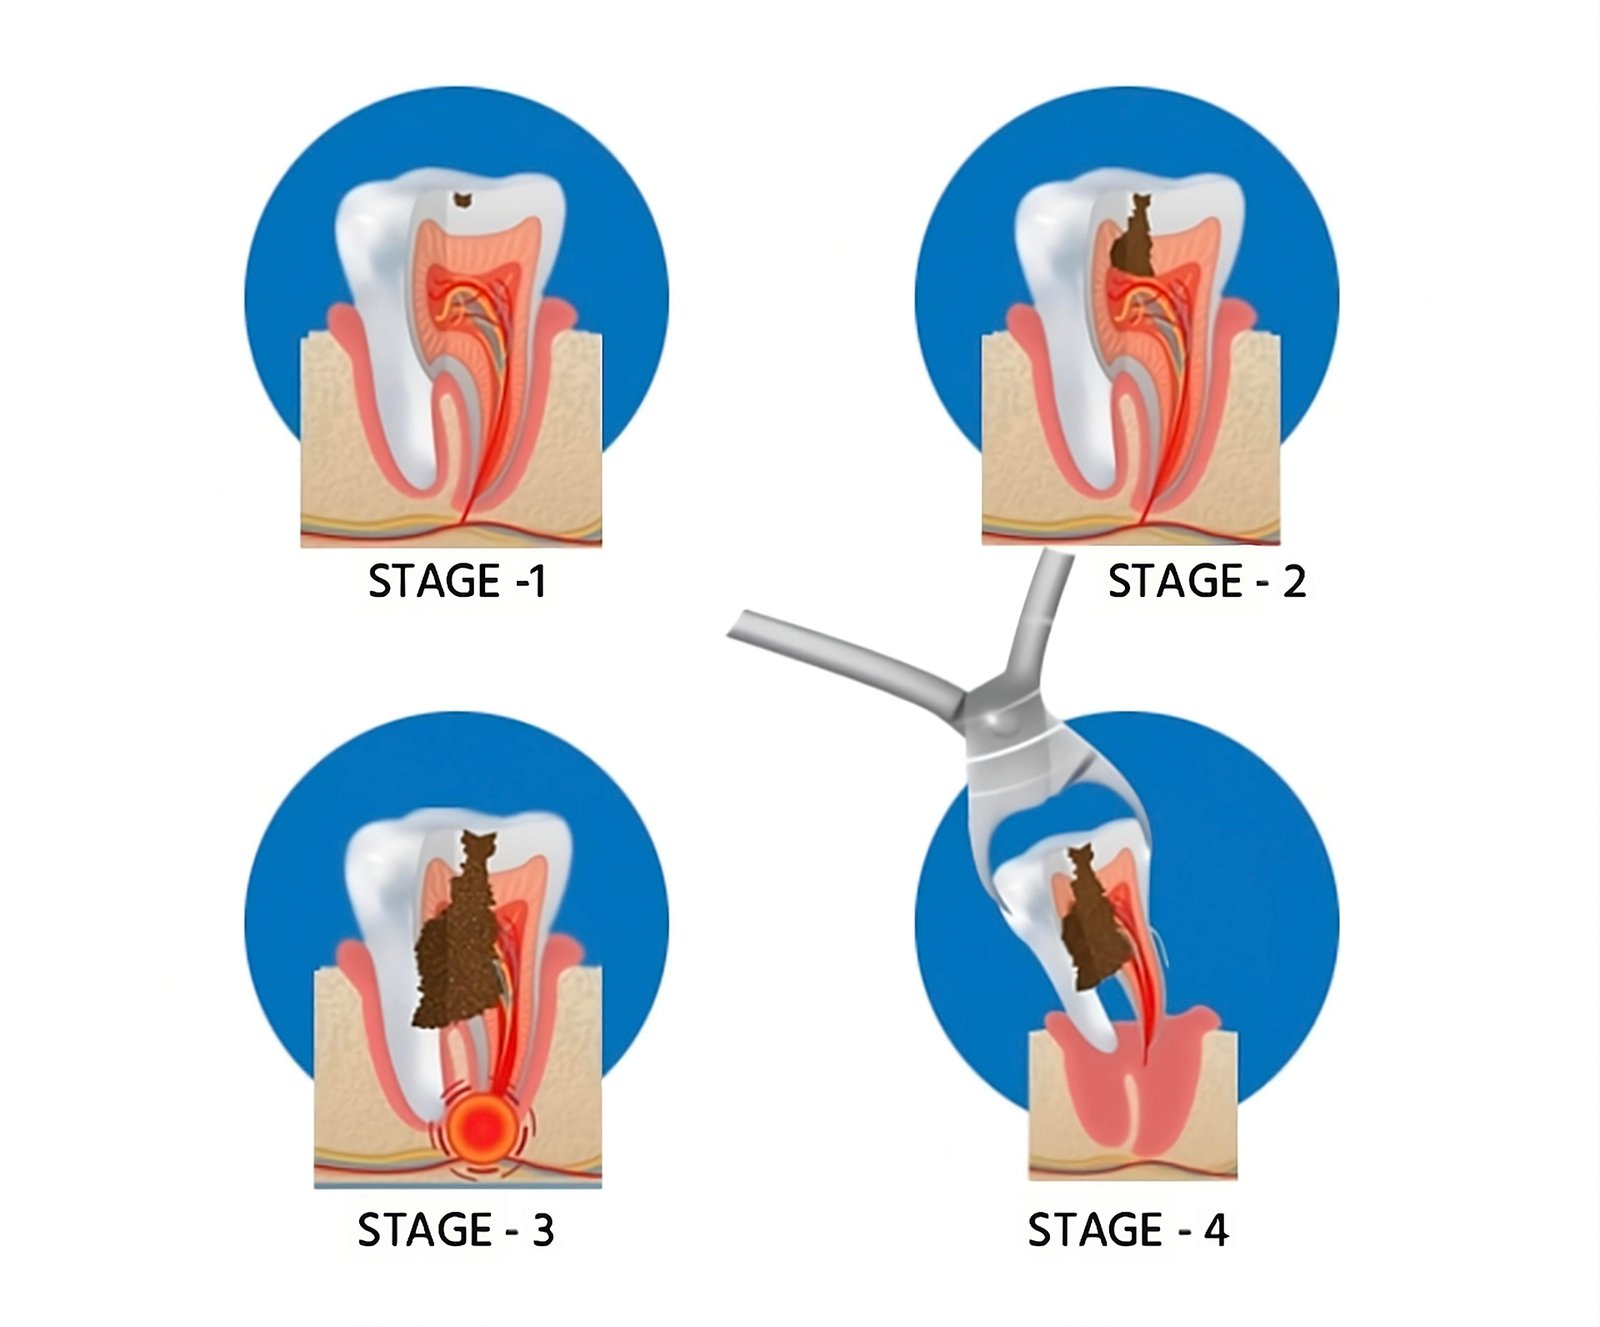 Best skilled experienced Dentist Performing Tooth Extraction Surgery in Scarborough